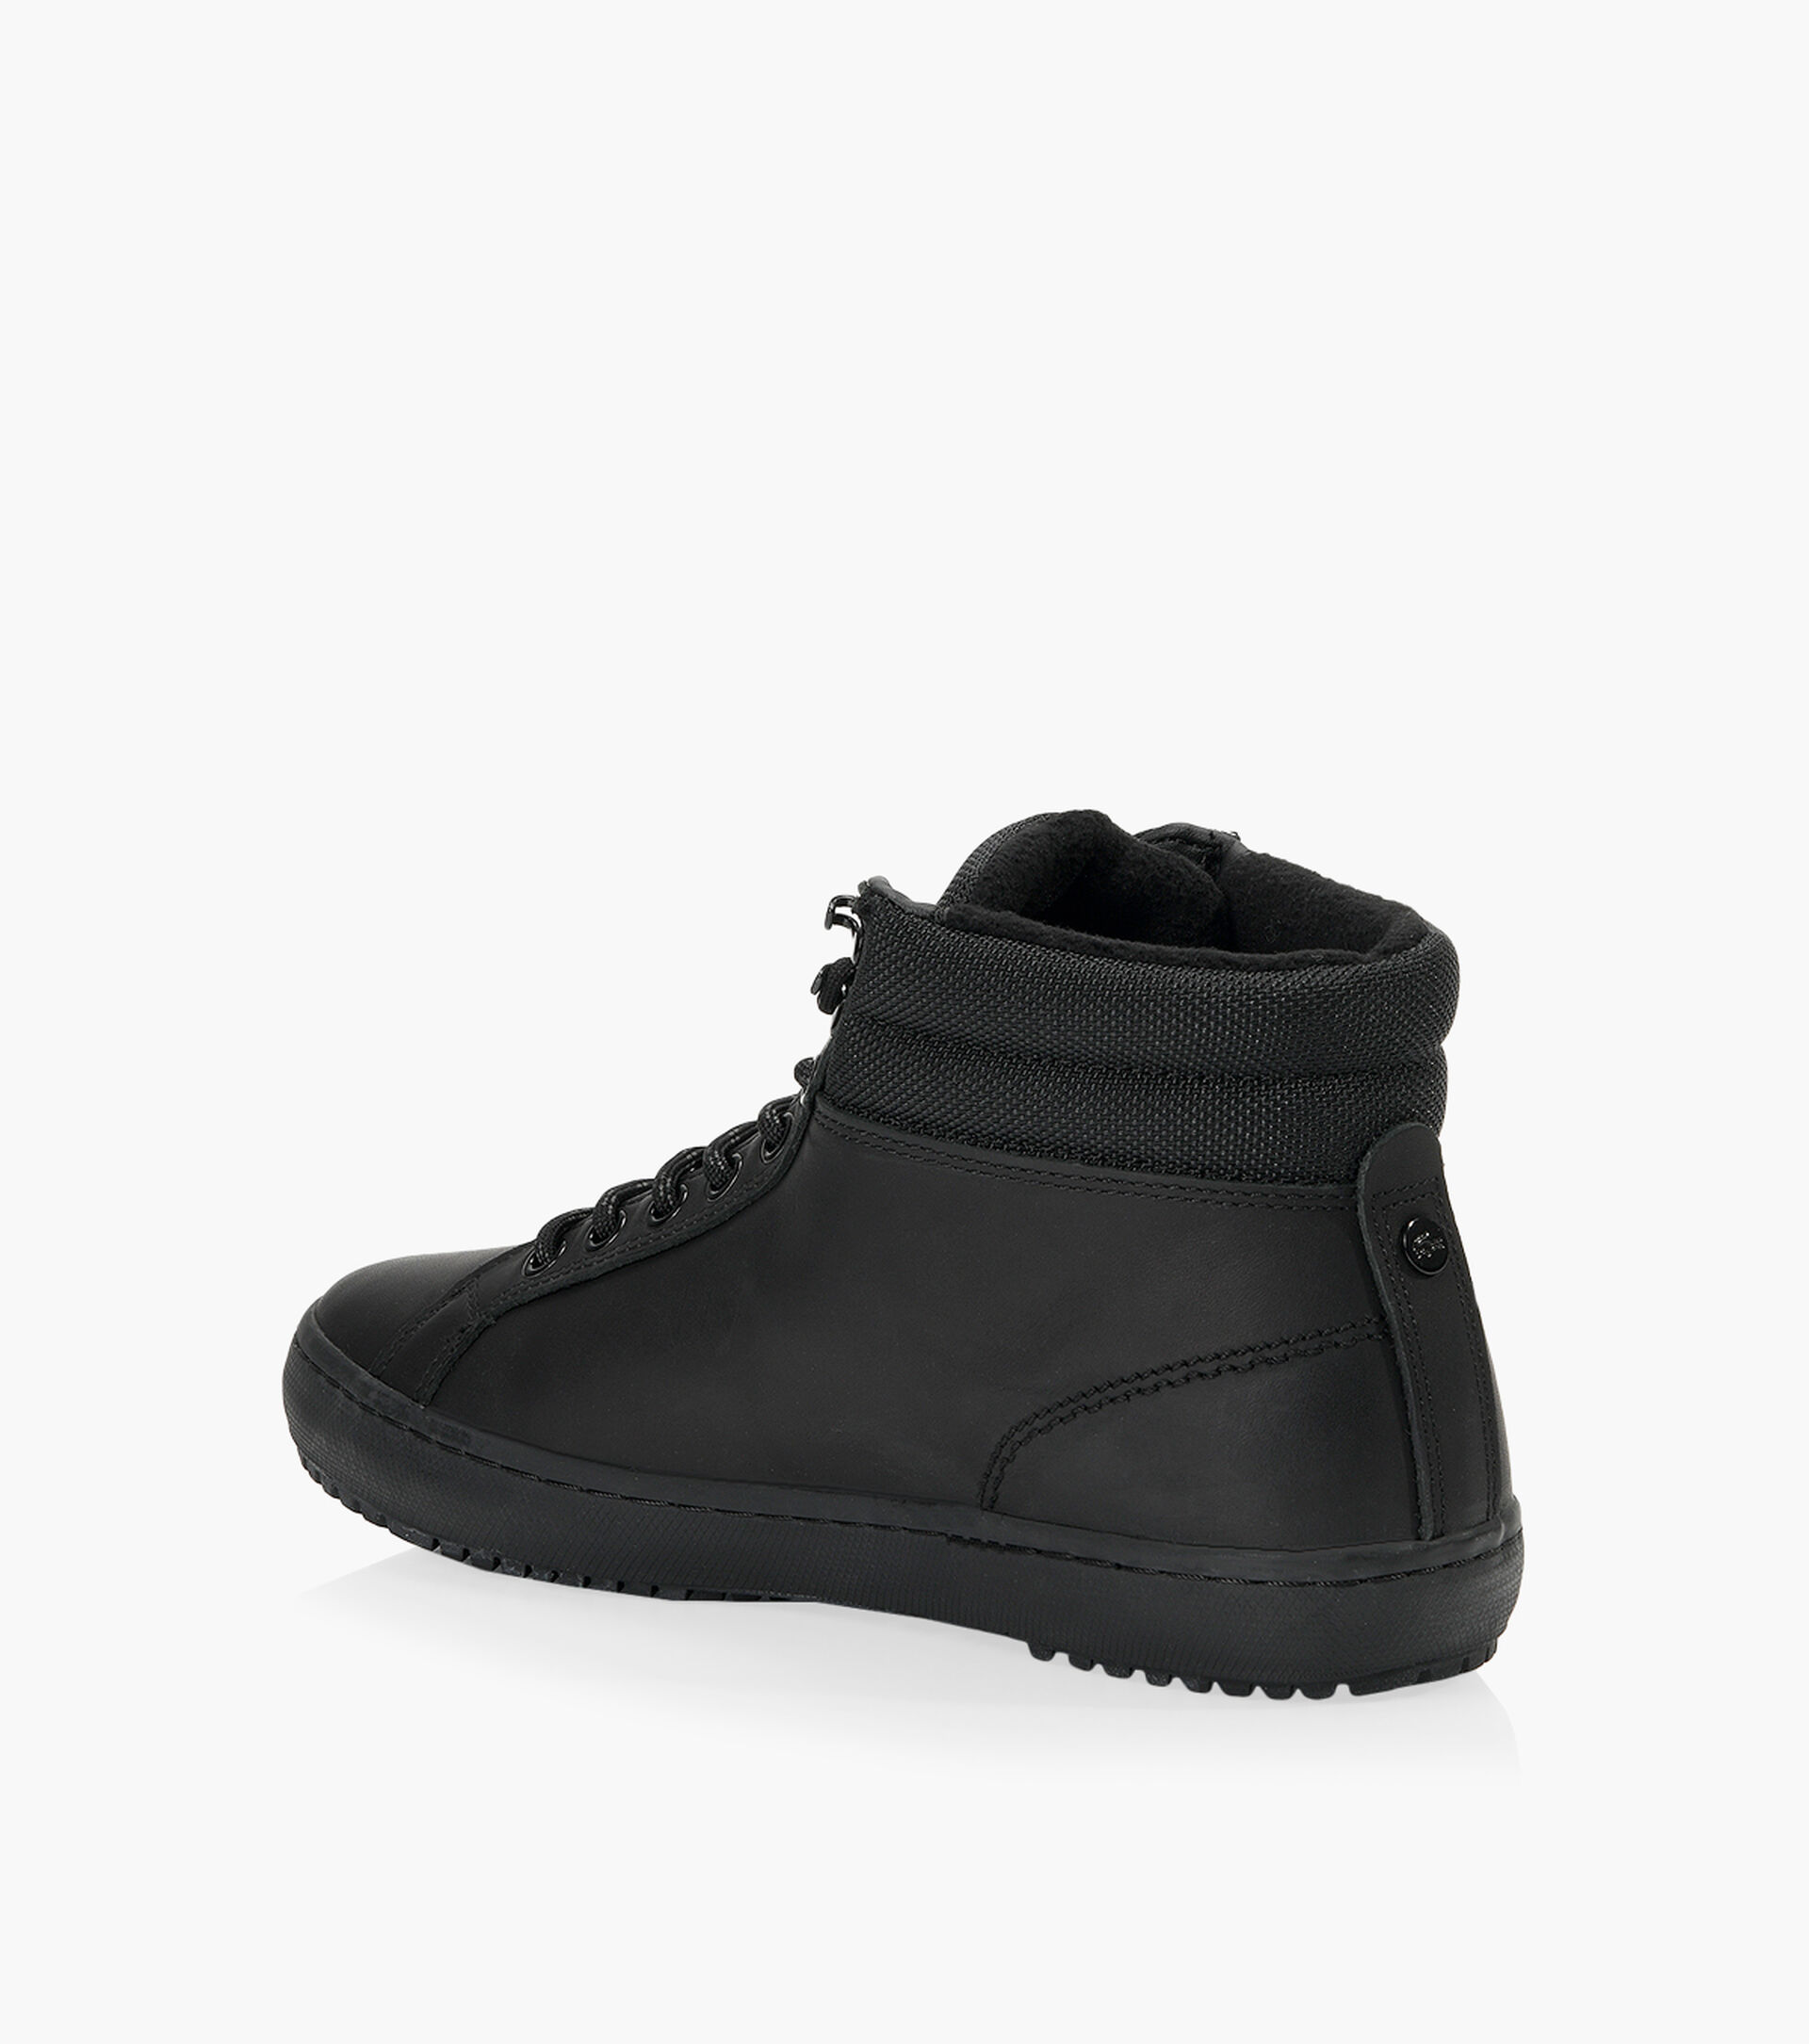 LACOSTE STRAIGHTSET THERMO - Black Leather | Browns Shoes